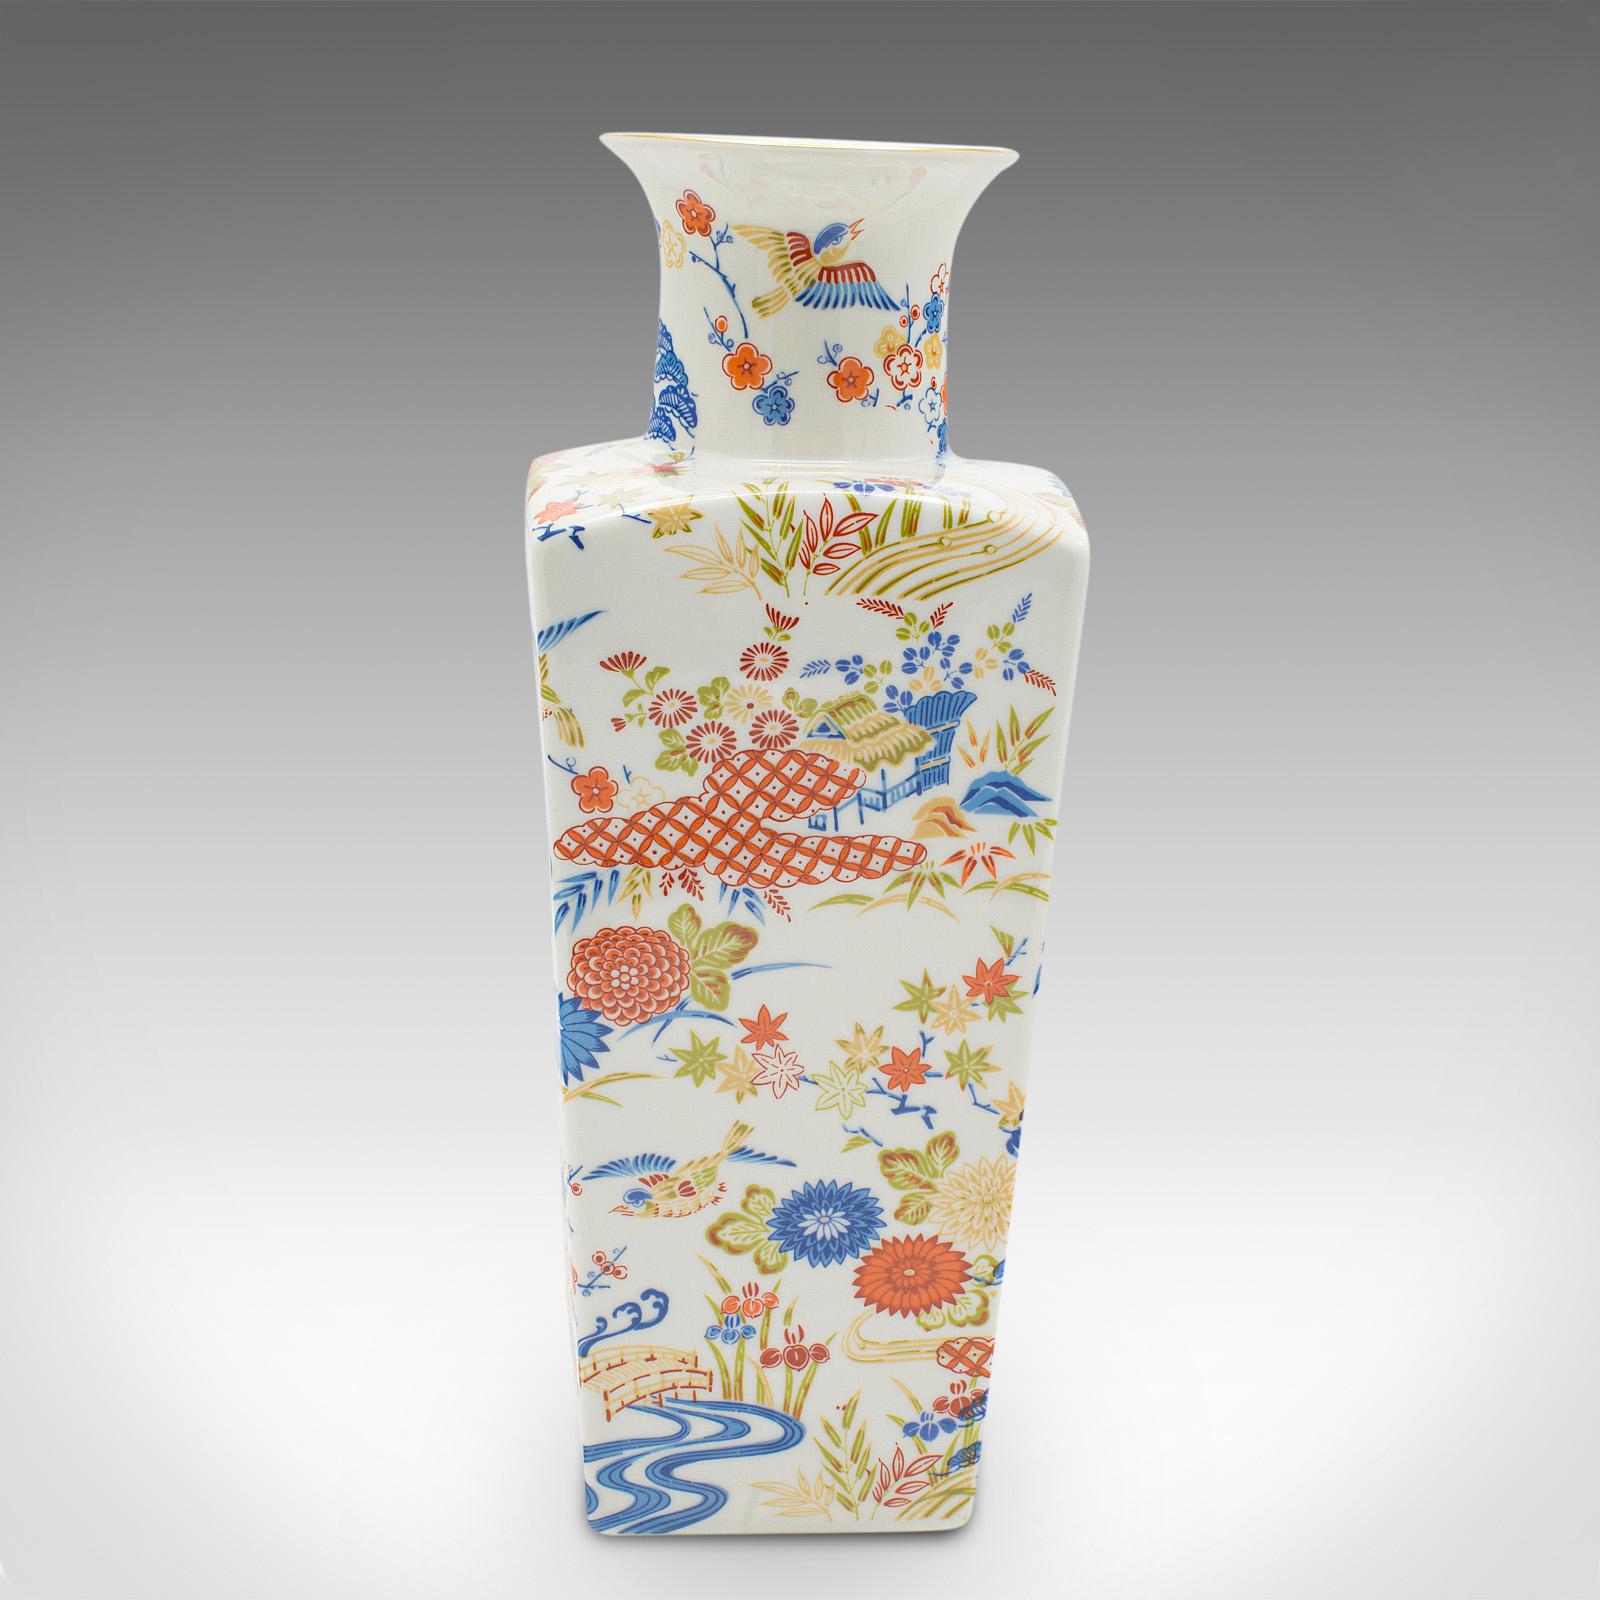 Vintage Art Deco Revival Vase, Chinese, Ceramic, Flower Pot, Late 20th Century In Good Condition For Sale In Hele, Devon, GB